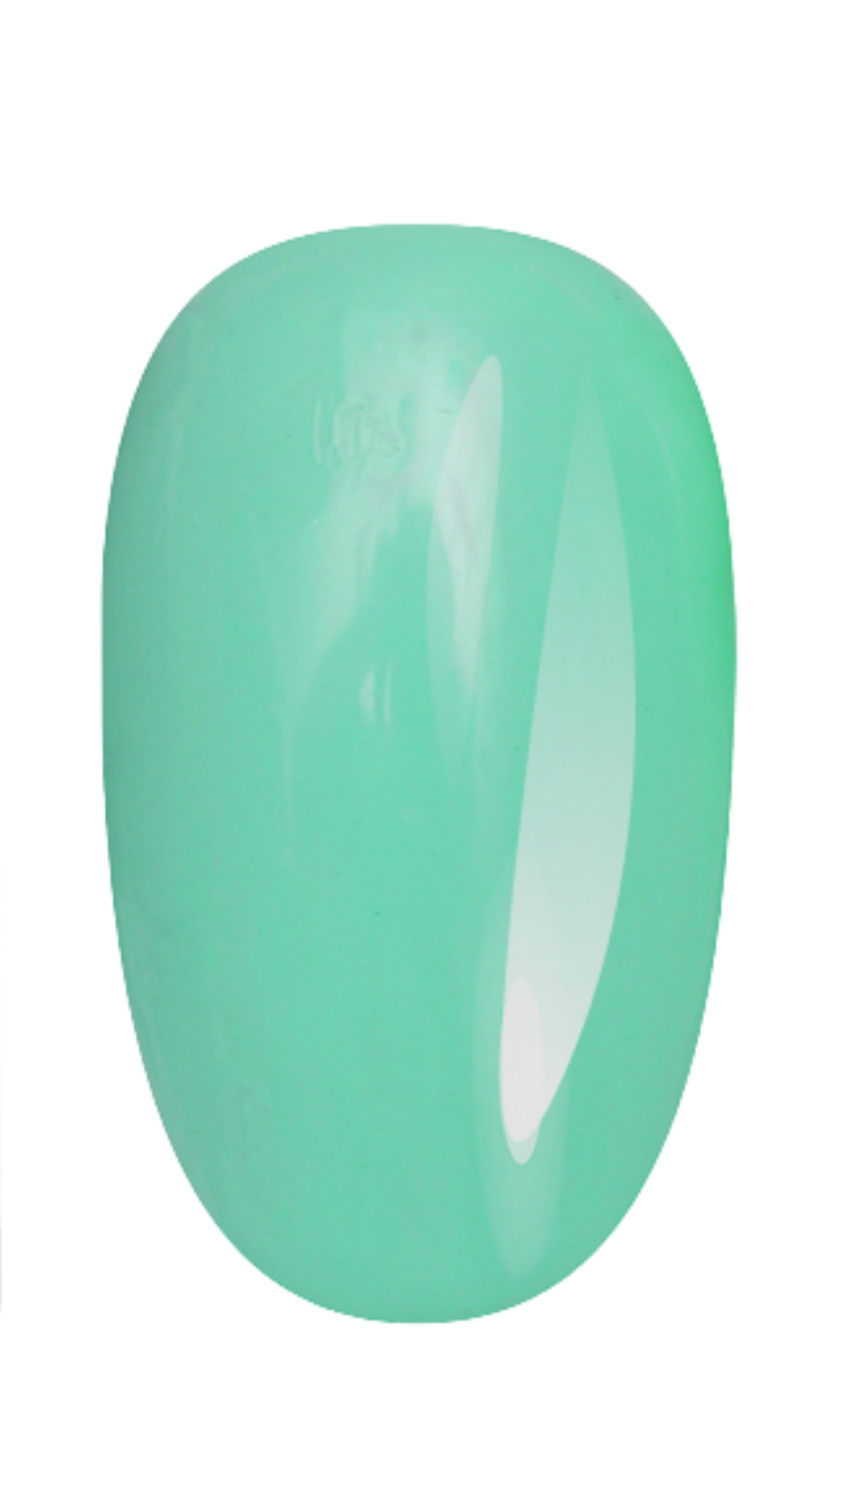 E.MiLac PR Turquoise Icing #198, 9 ml.